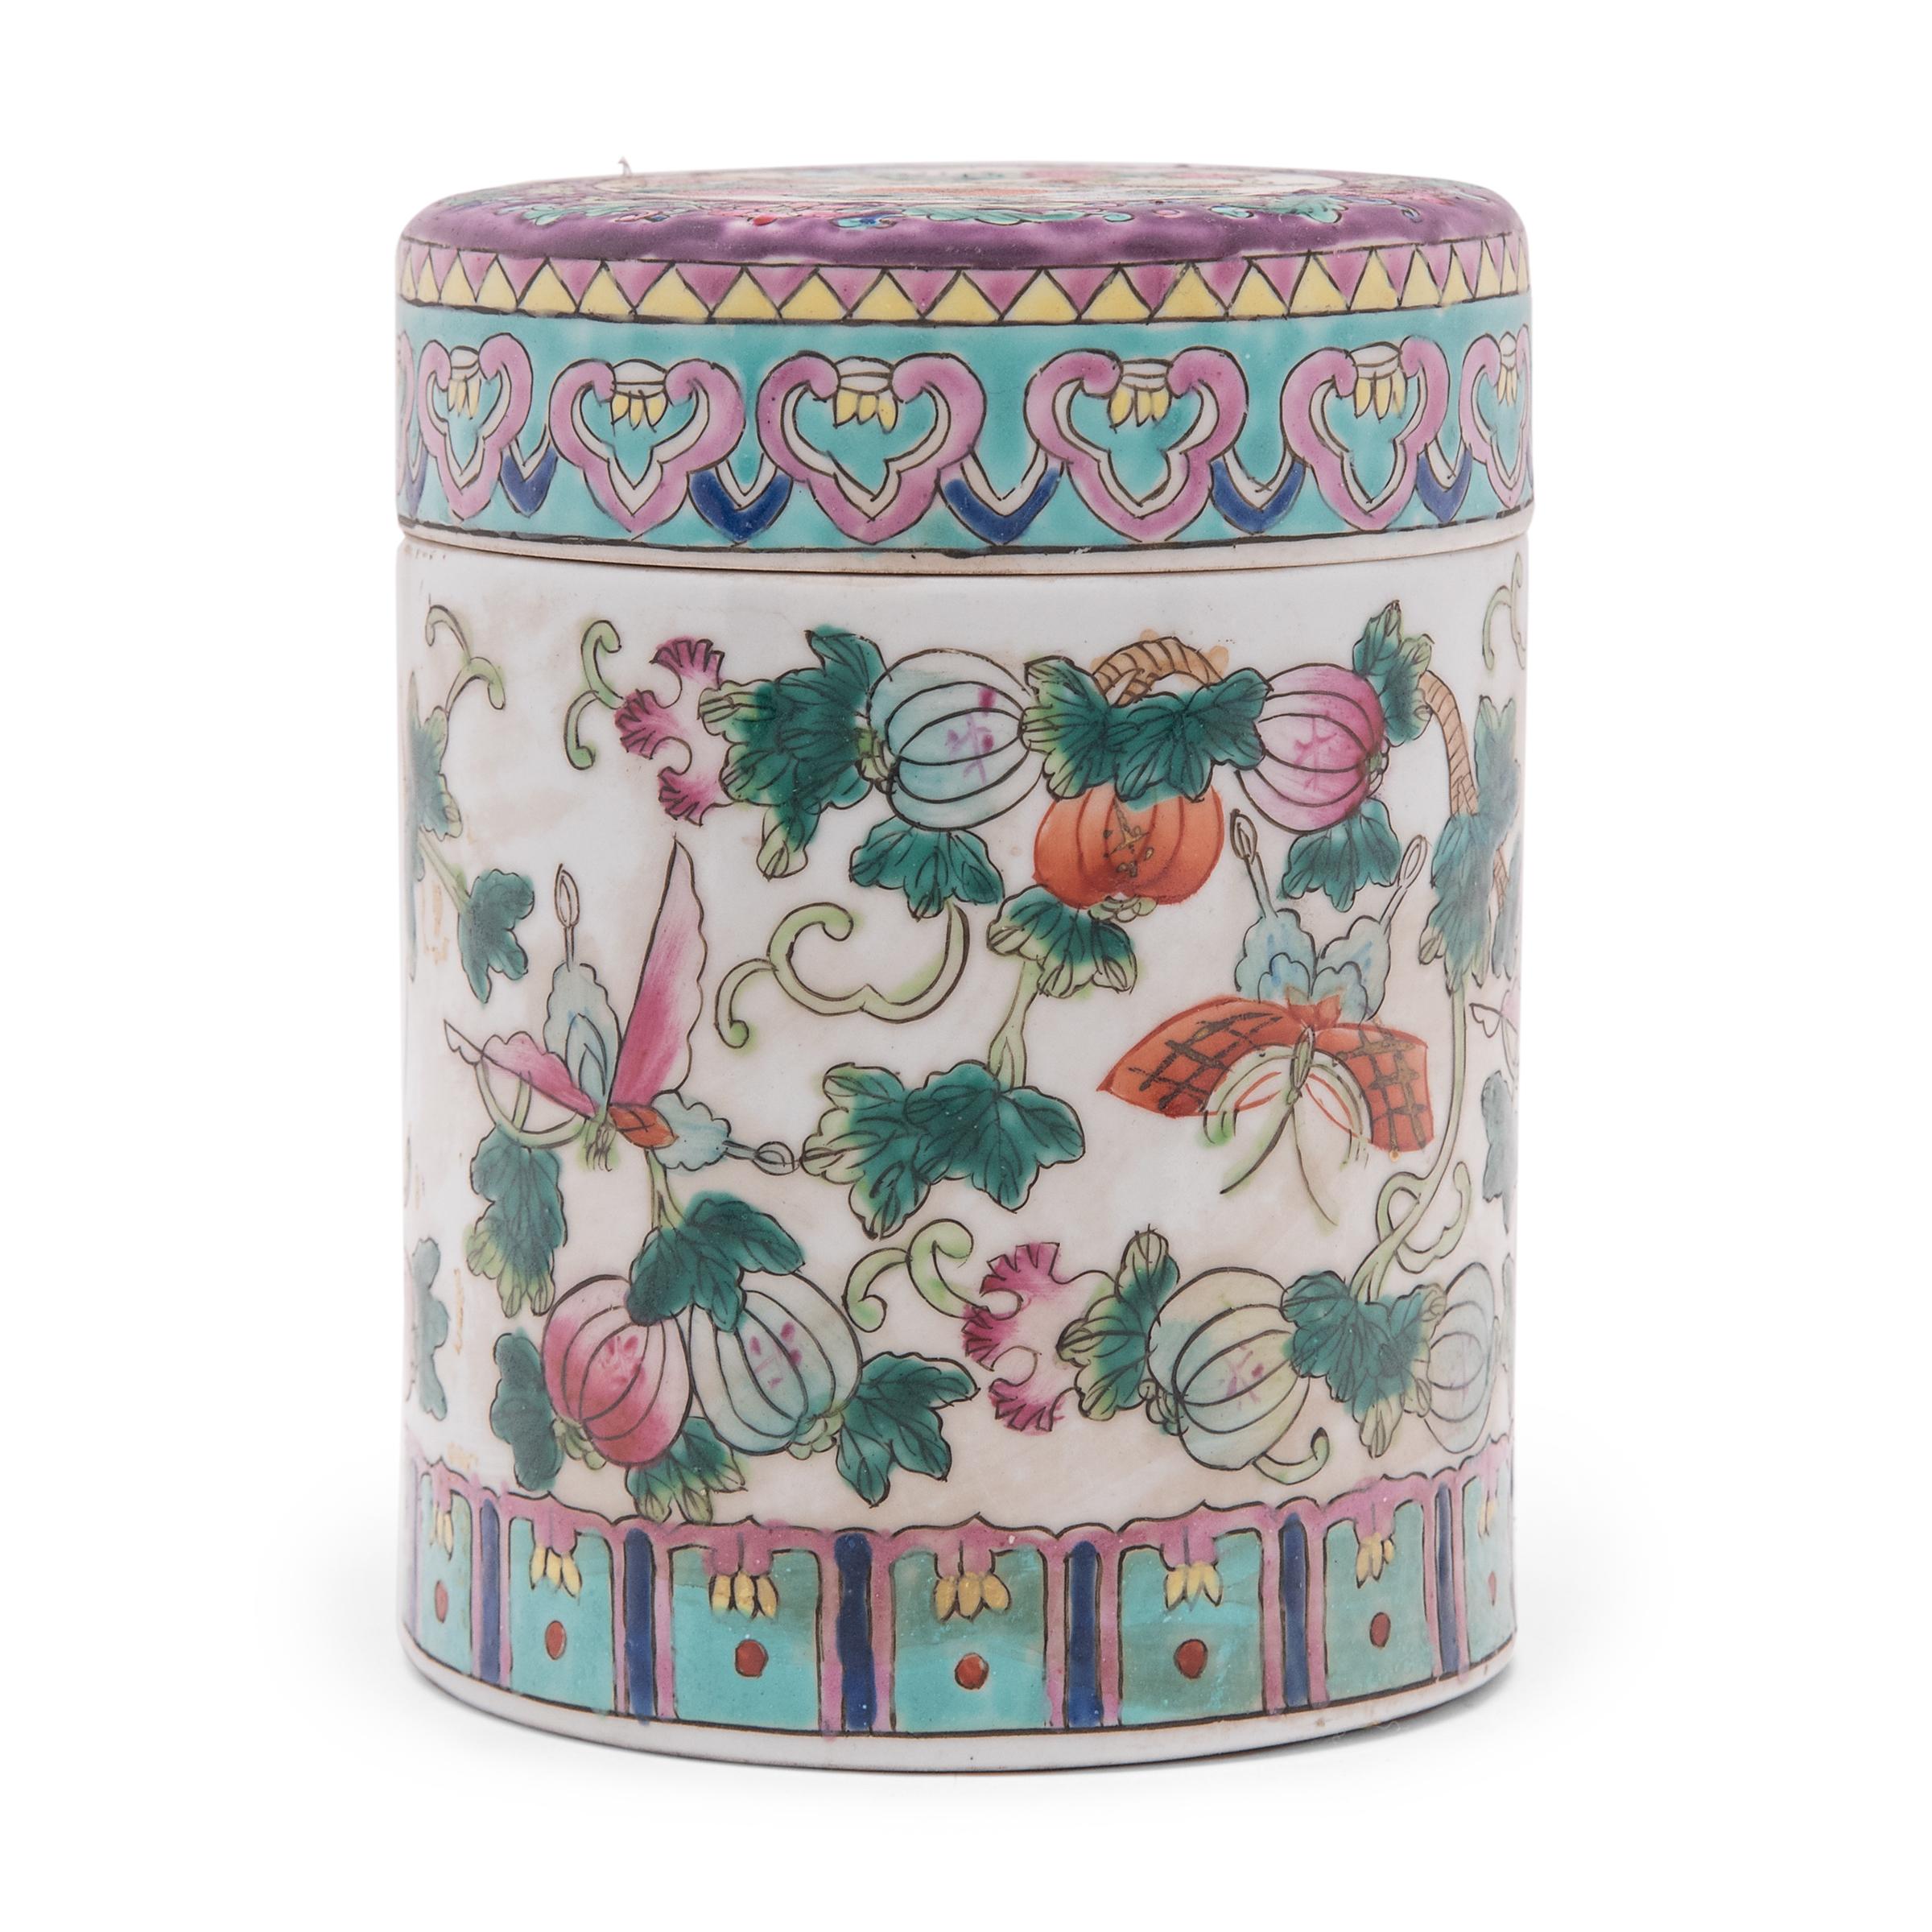 Used to store loose leaf tea, this porcelain jar is decorated in a style of overglaze enameling known as 